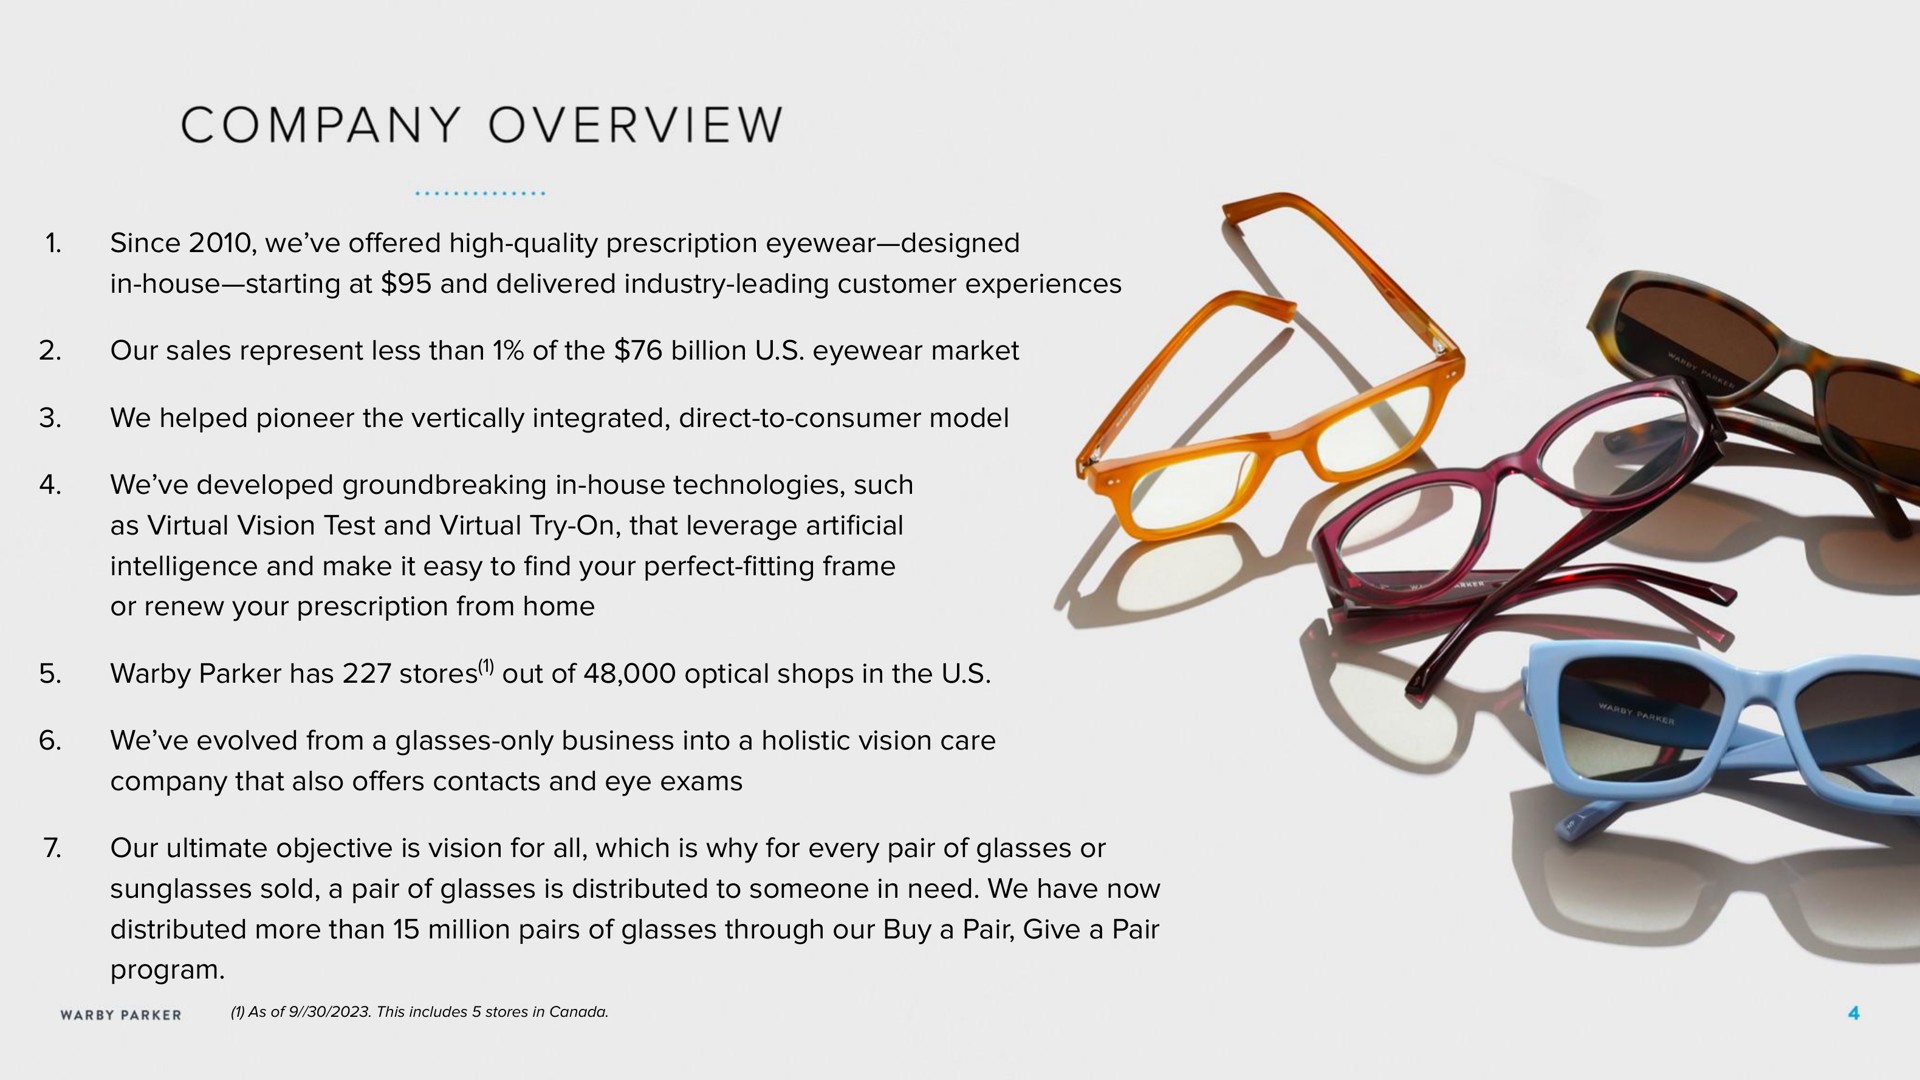 since we high quality prescription eyewear designed in house starting at and delivered industry leading customer experiences our sales represent less than of the billion eyewear market we helped pioneer the vertically integrated direct to consumer model we developed in house technologies such as virtual vision test and virtual try on that leverage intelligence and make it easy to your perfect frame or renew your prescription from home parker has stores out of optical shops in the we evolved from a glasses only business into a holistic vision care company that also ers contacts and eye exams our ultimate objective is vision for all which is why for every pair of glasses or sunglasses sold a pair of glasses is distributed to someone in need we have now distributed more than million pairs of glasses through our buy a pair give a pair program overview offered artificial find perfect fitting offers | Warby Parker